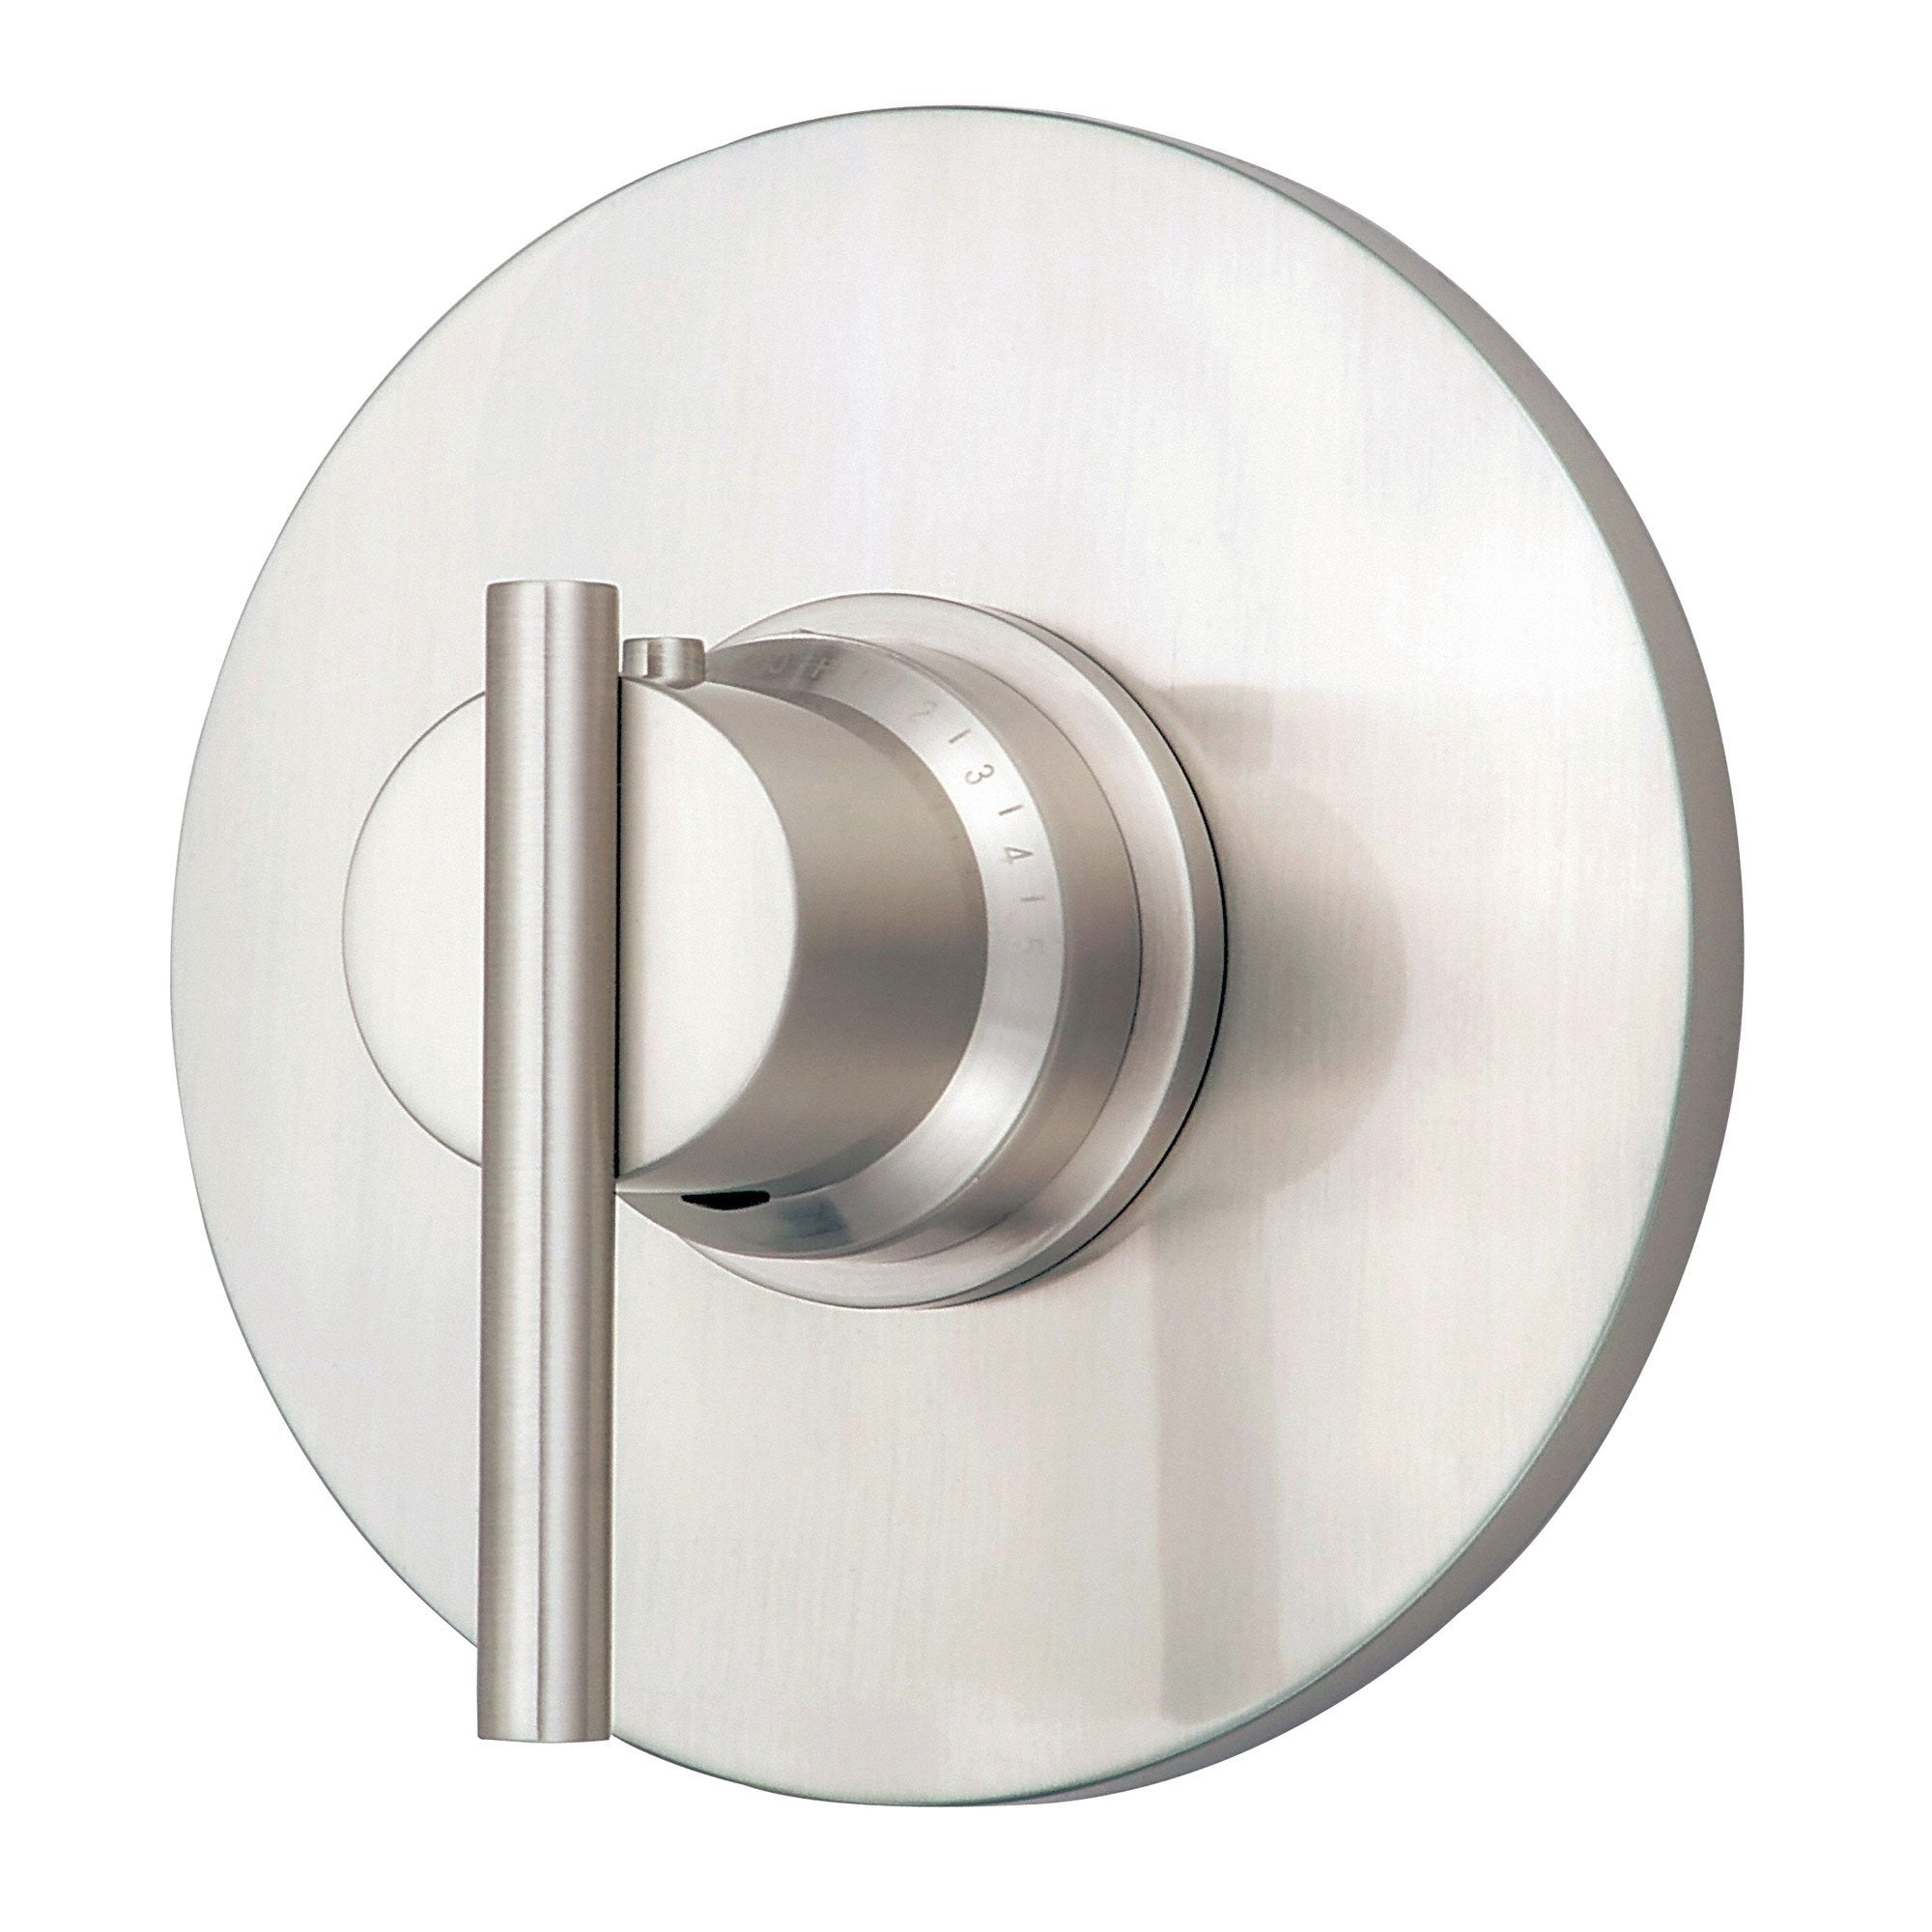 Danze Parma Brushed Nickel 3/4" High-Volume Thermostatic Shower Control INCLUDES Rough-in Valve